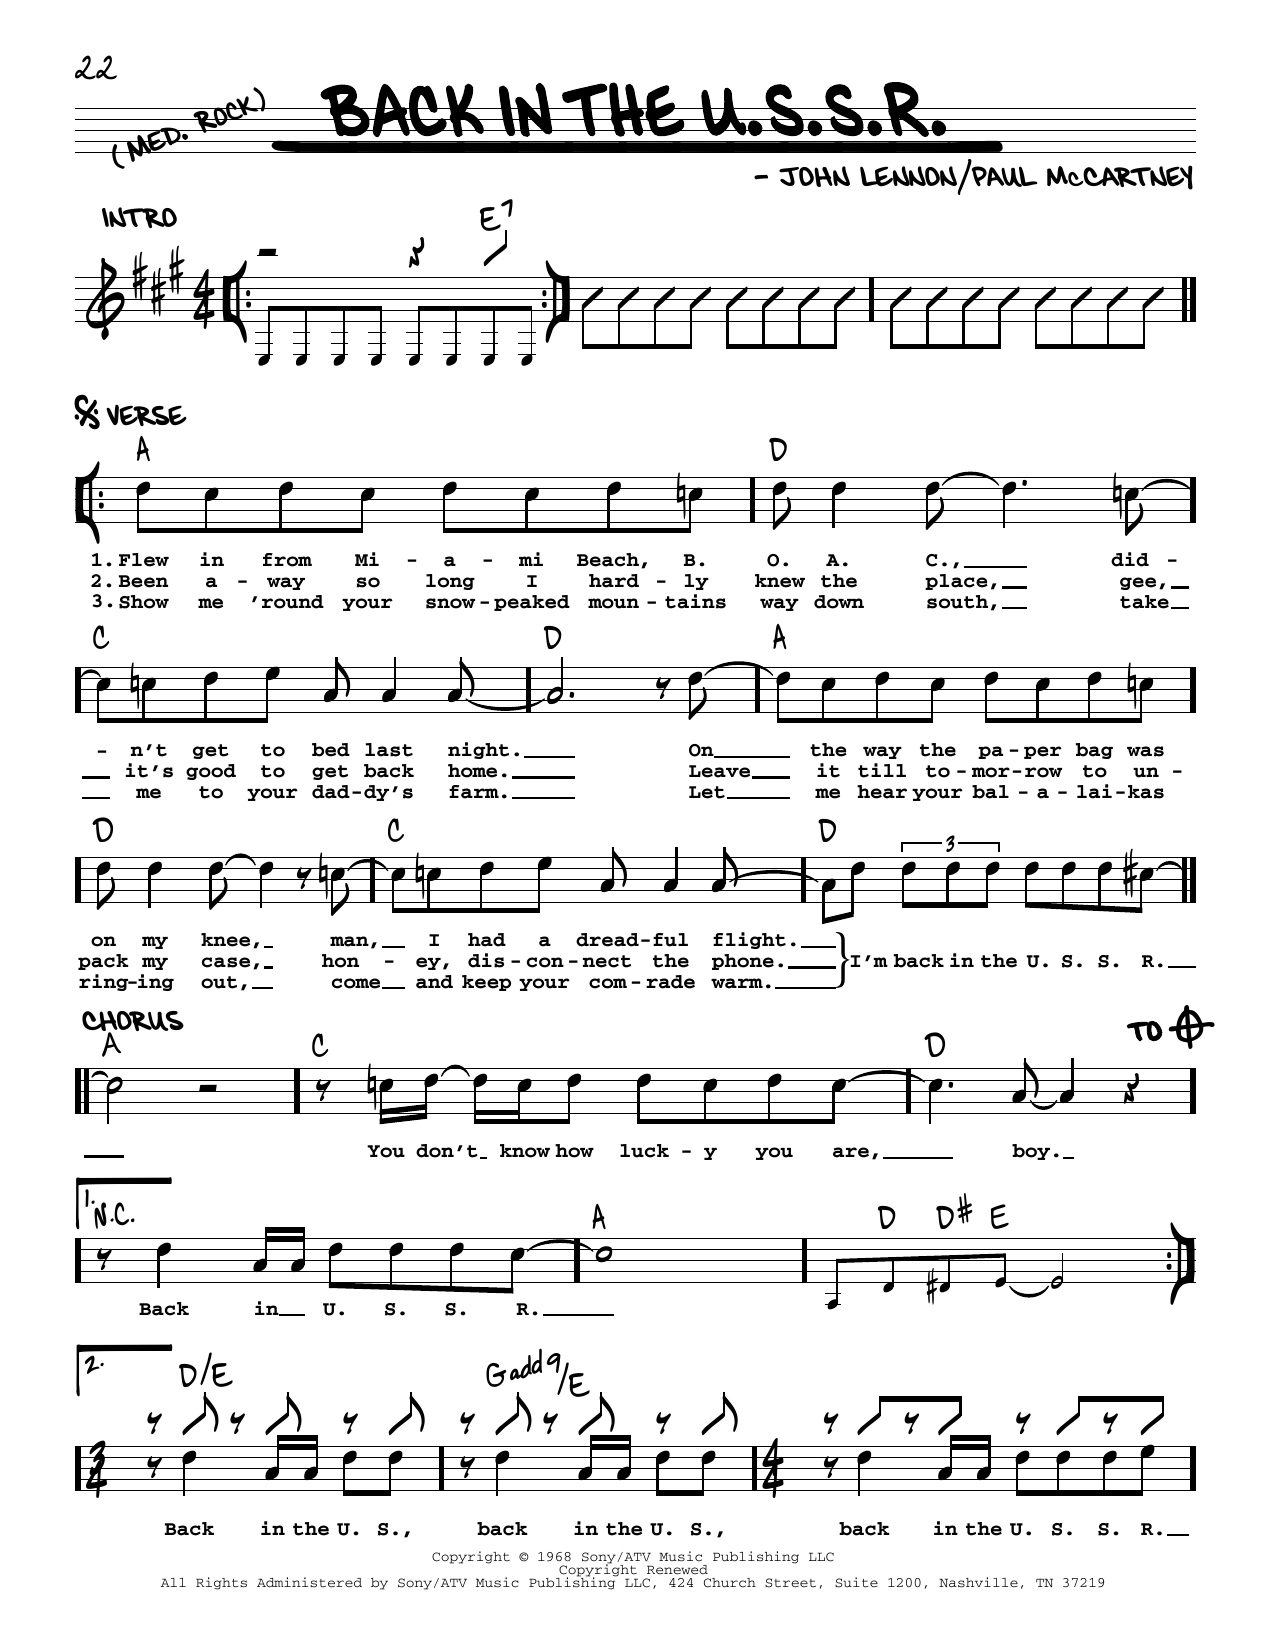 Download The Beatles Back In The U.S.S.R. [Jazz version] Sheet Music